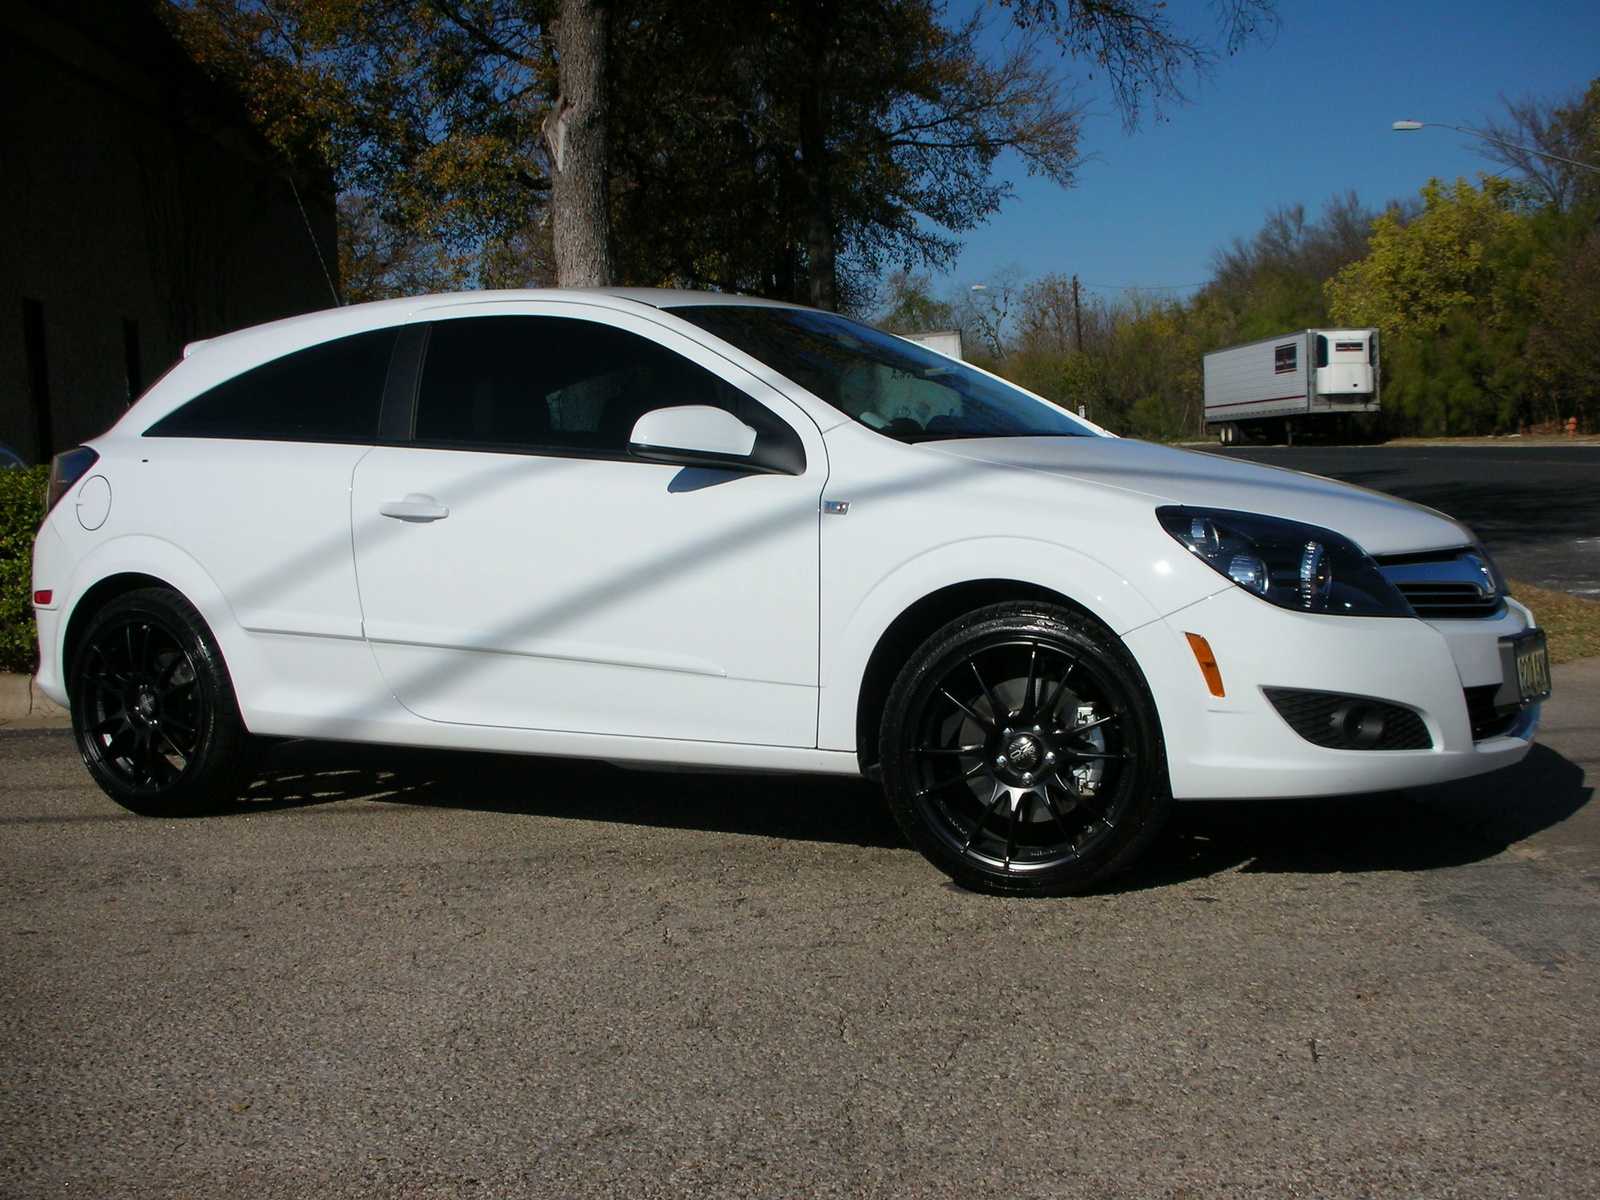 Saturn Astra XR Coupe